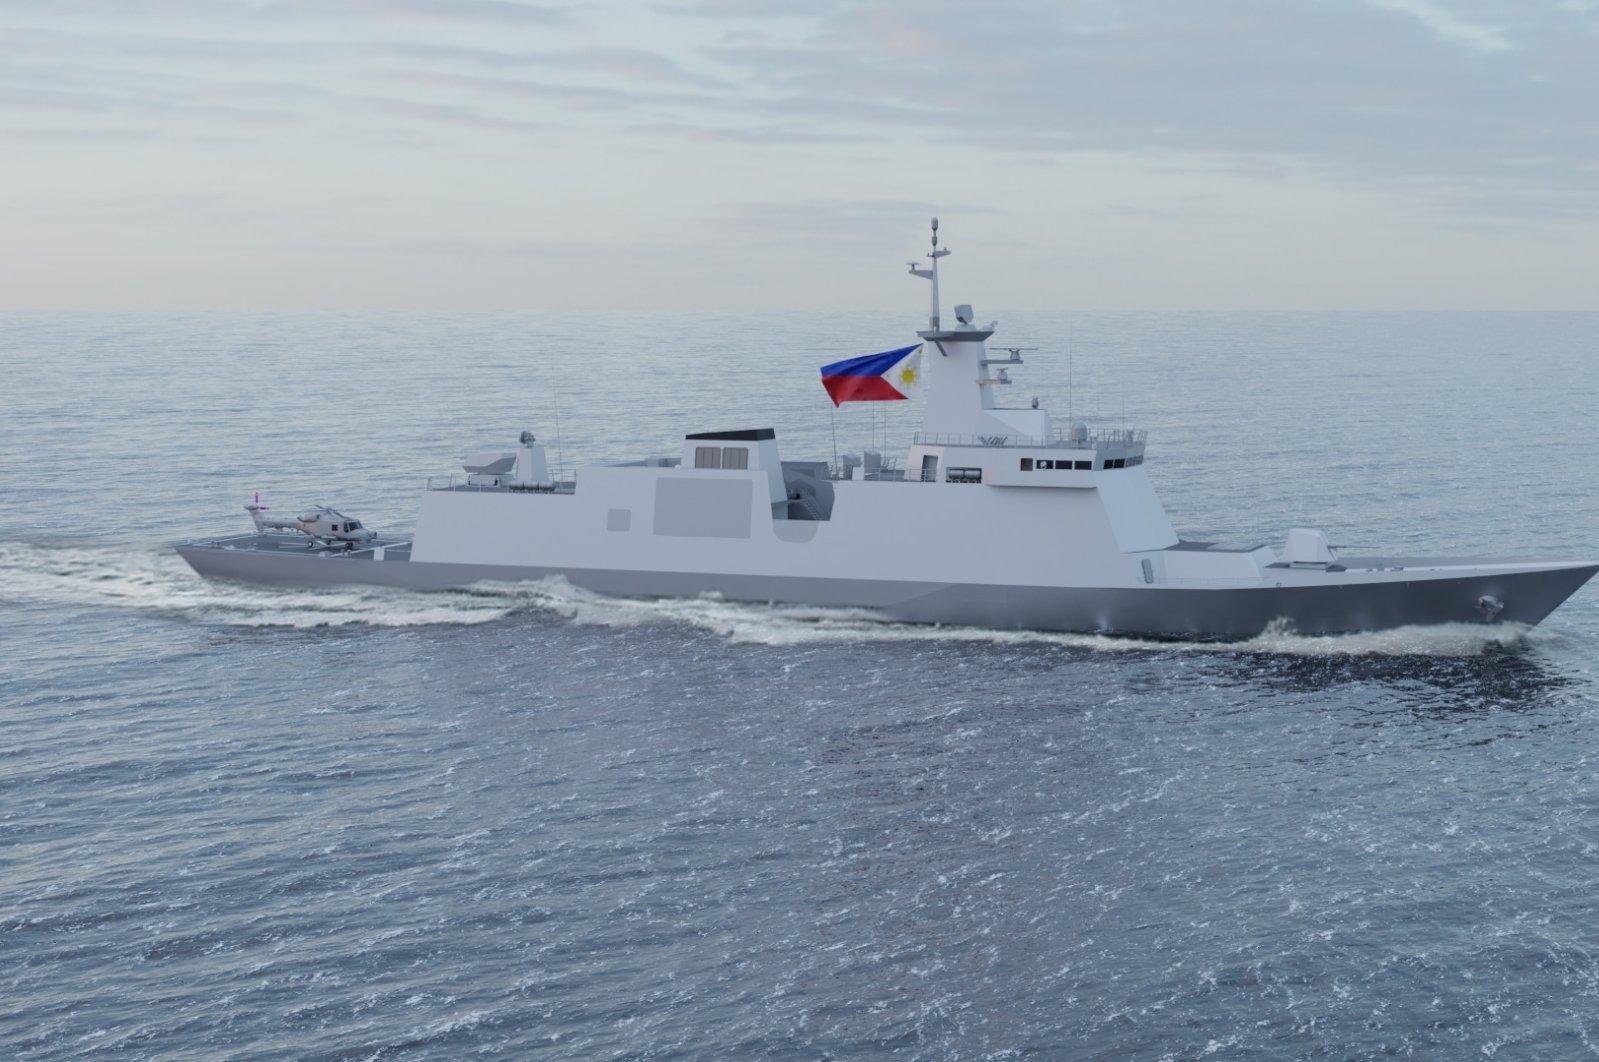 The new corvette design for the Philippine Navy is seen in this rendering image provided by HHI on Dec. 28, 2021.